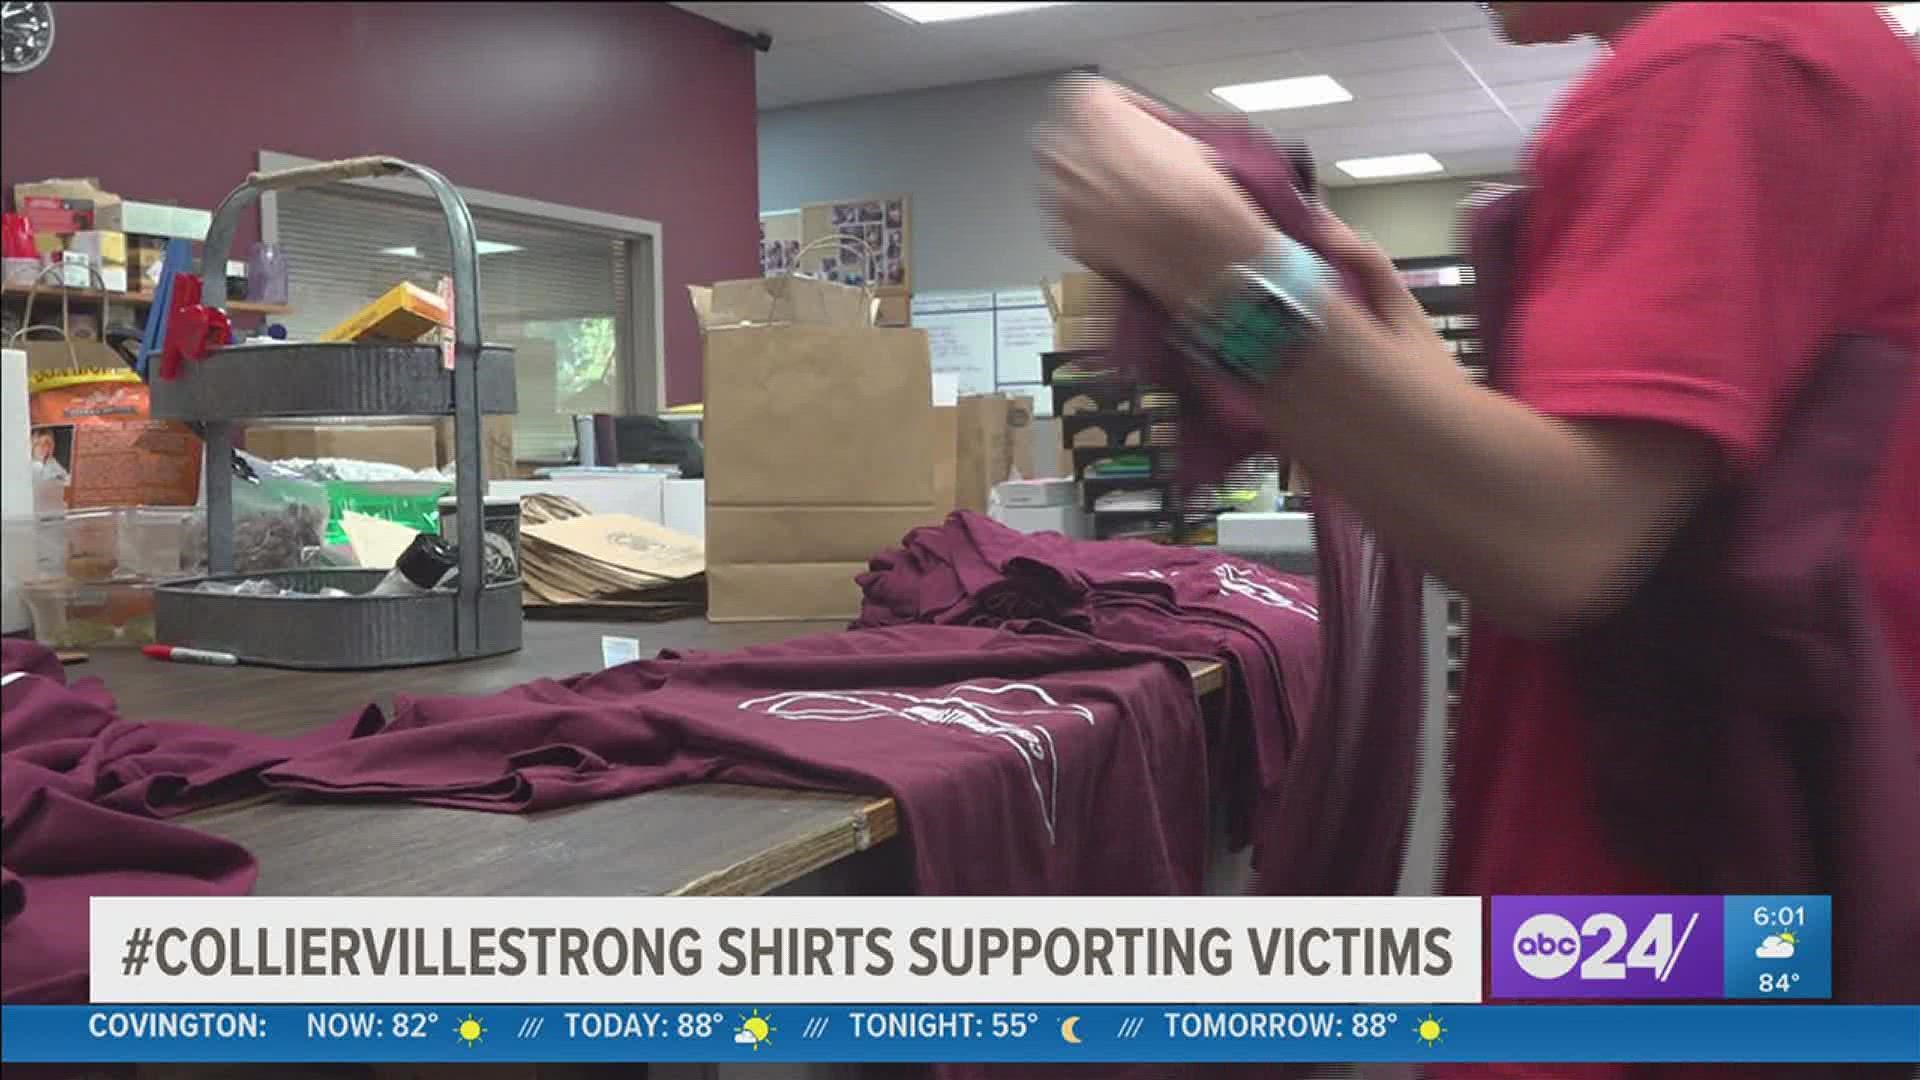 The $20 maroon T-shirts reads "Collierville Strong" on the front.